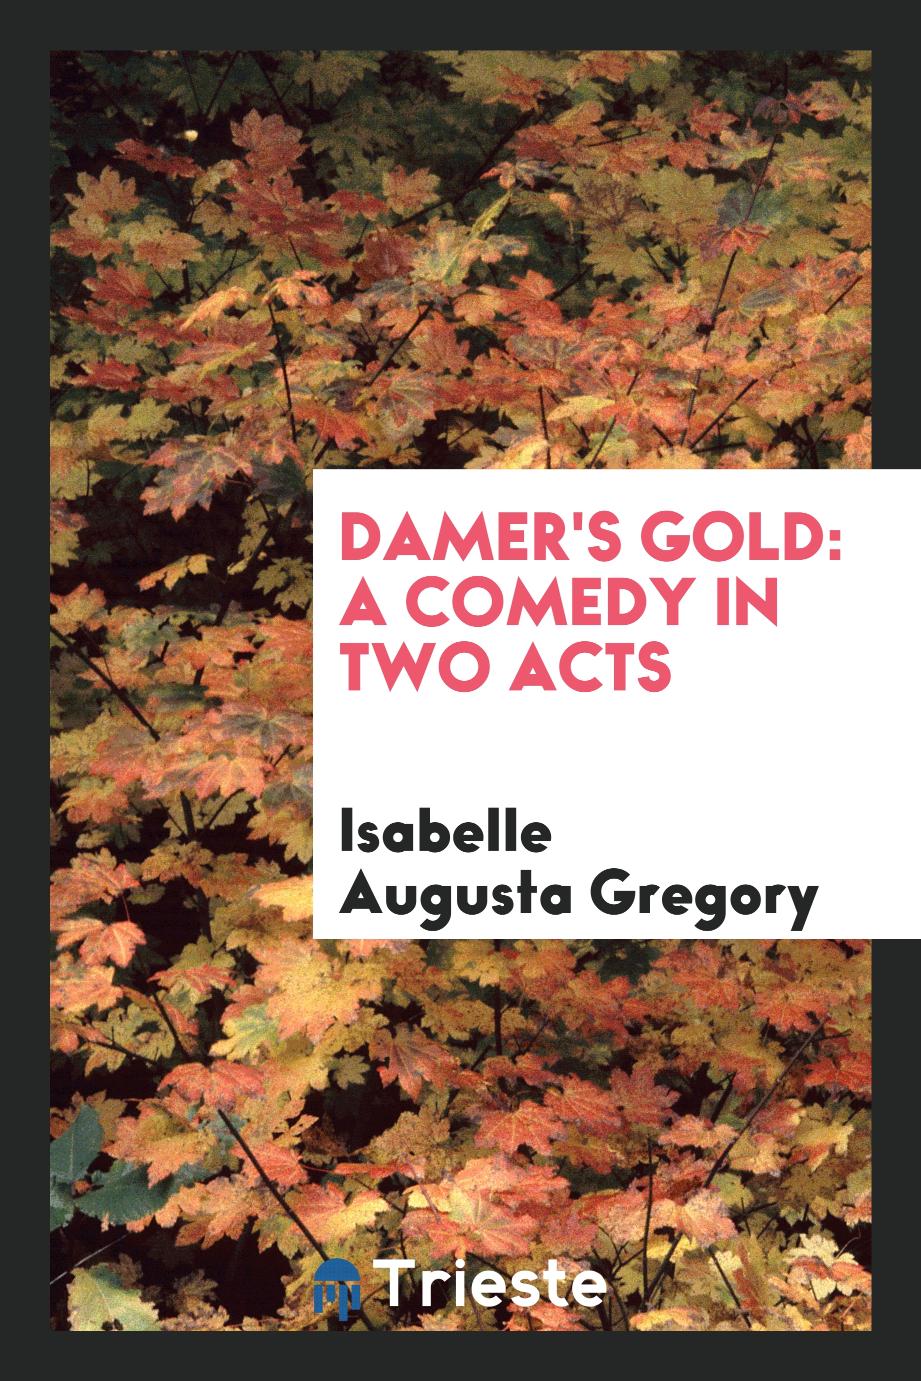 Isabelle Augusta Gregory - Damer's Gold: A Comedy in Two Acts